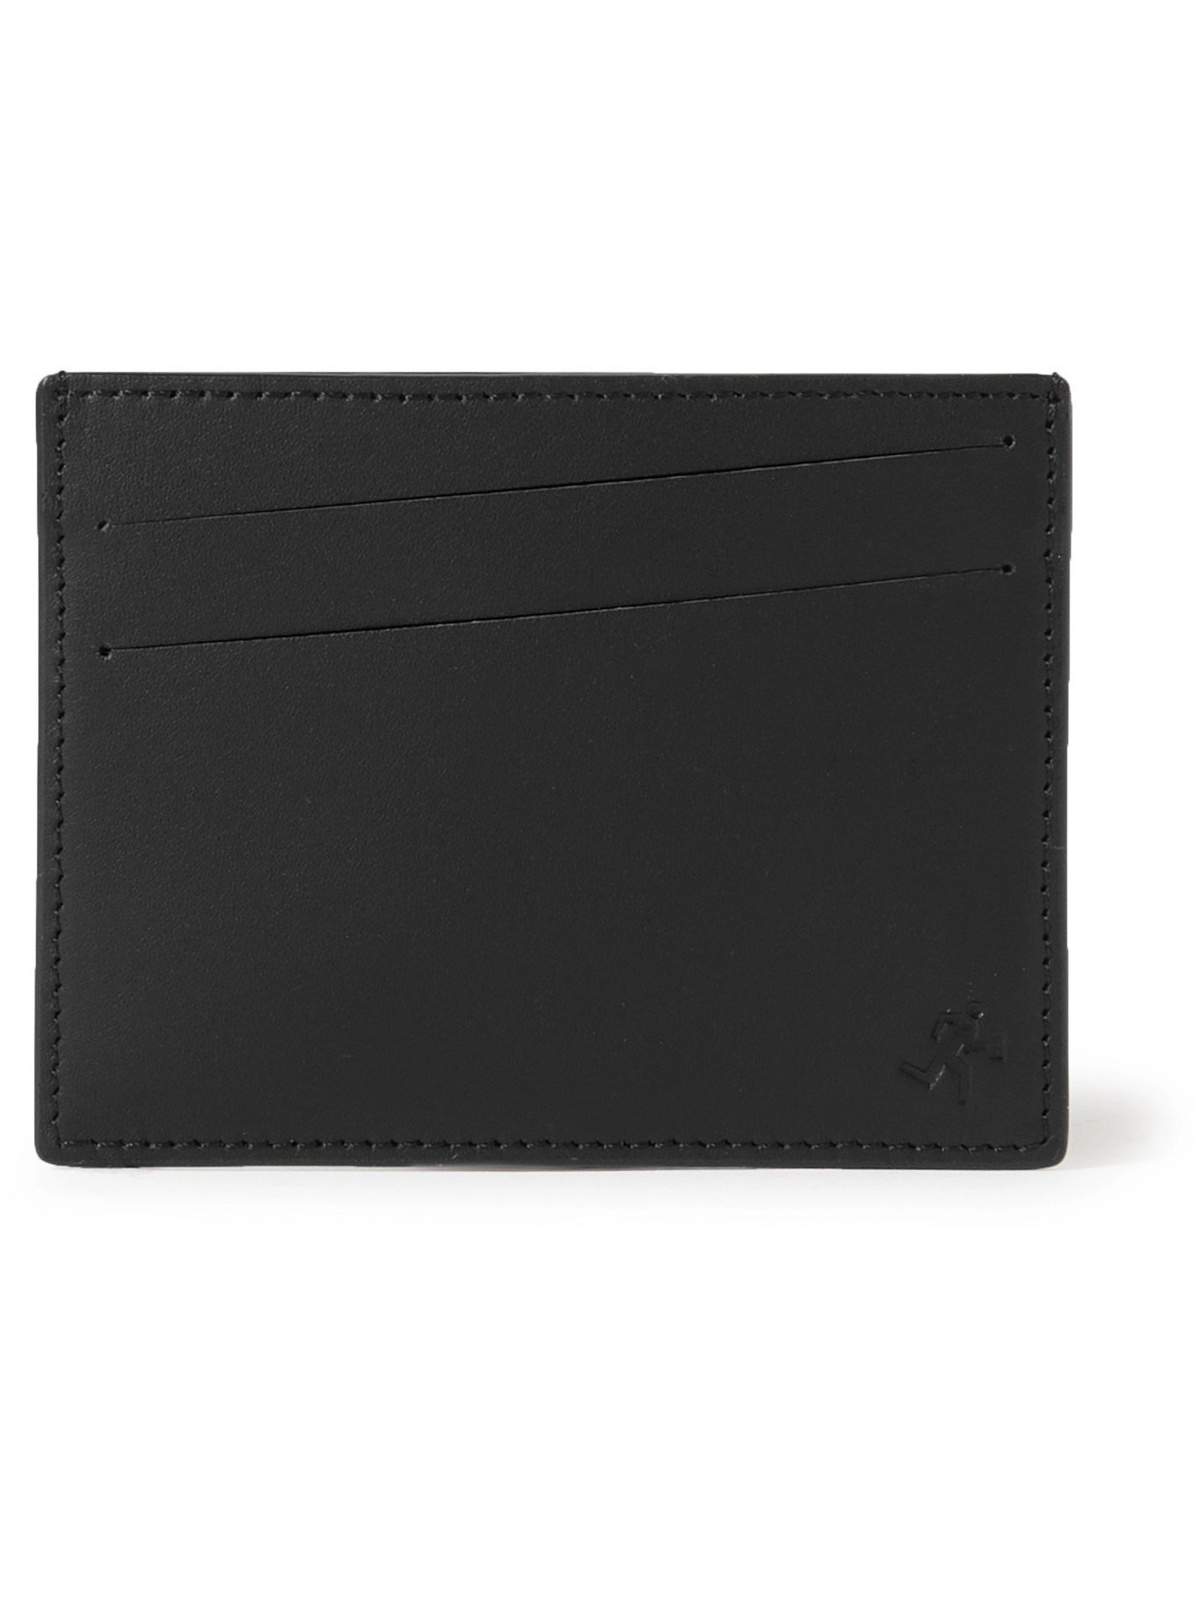 Photo: WANT LES ESSENTIELS - Branson Logo-Debossed Textured and Smooth Leather Cardholder - Black